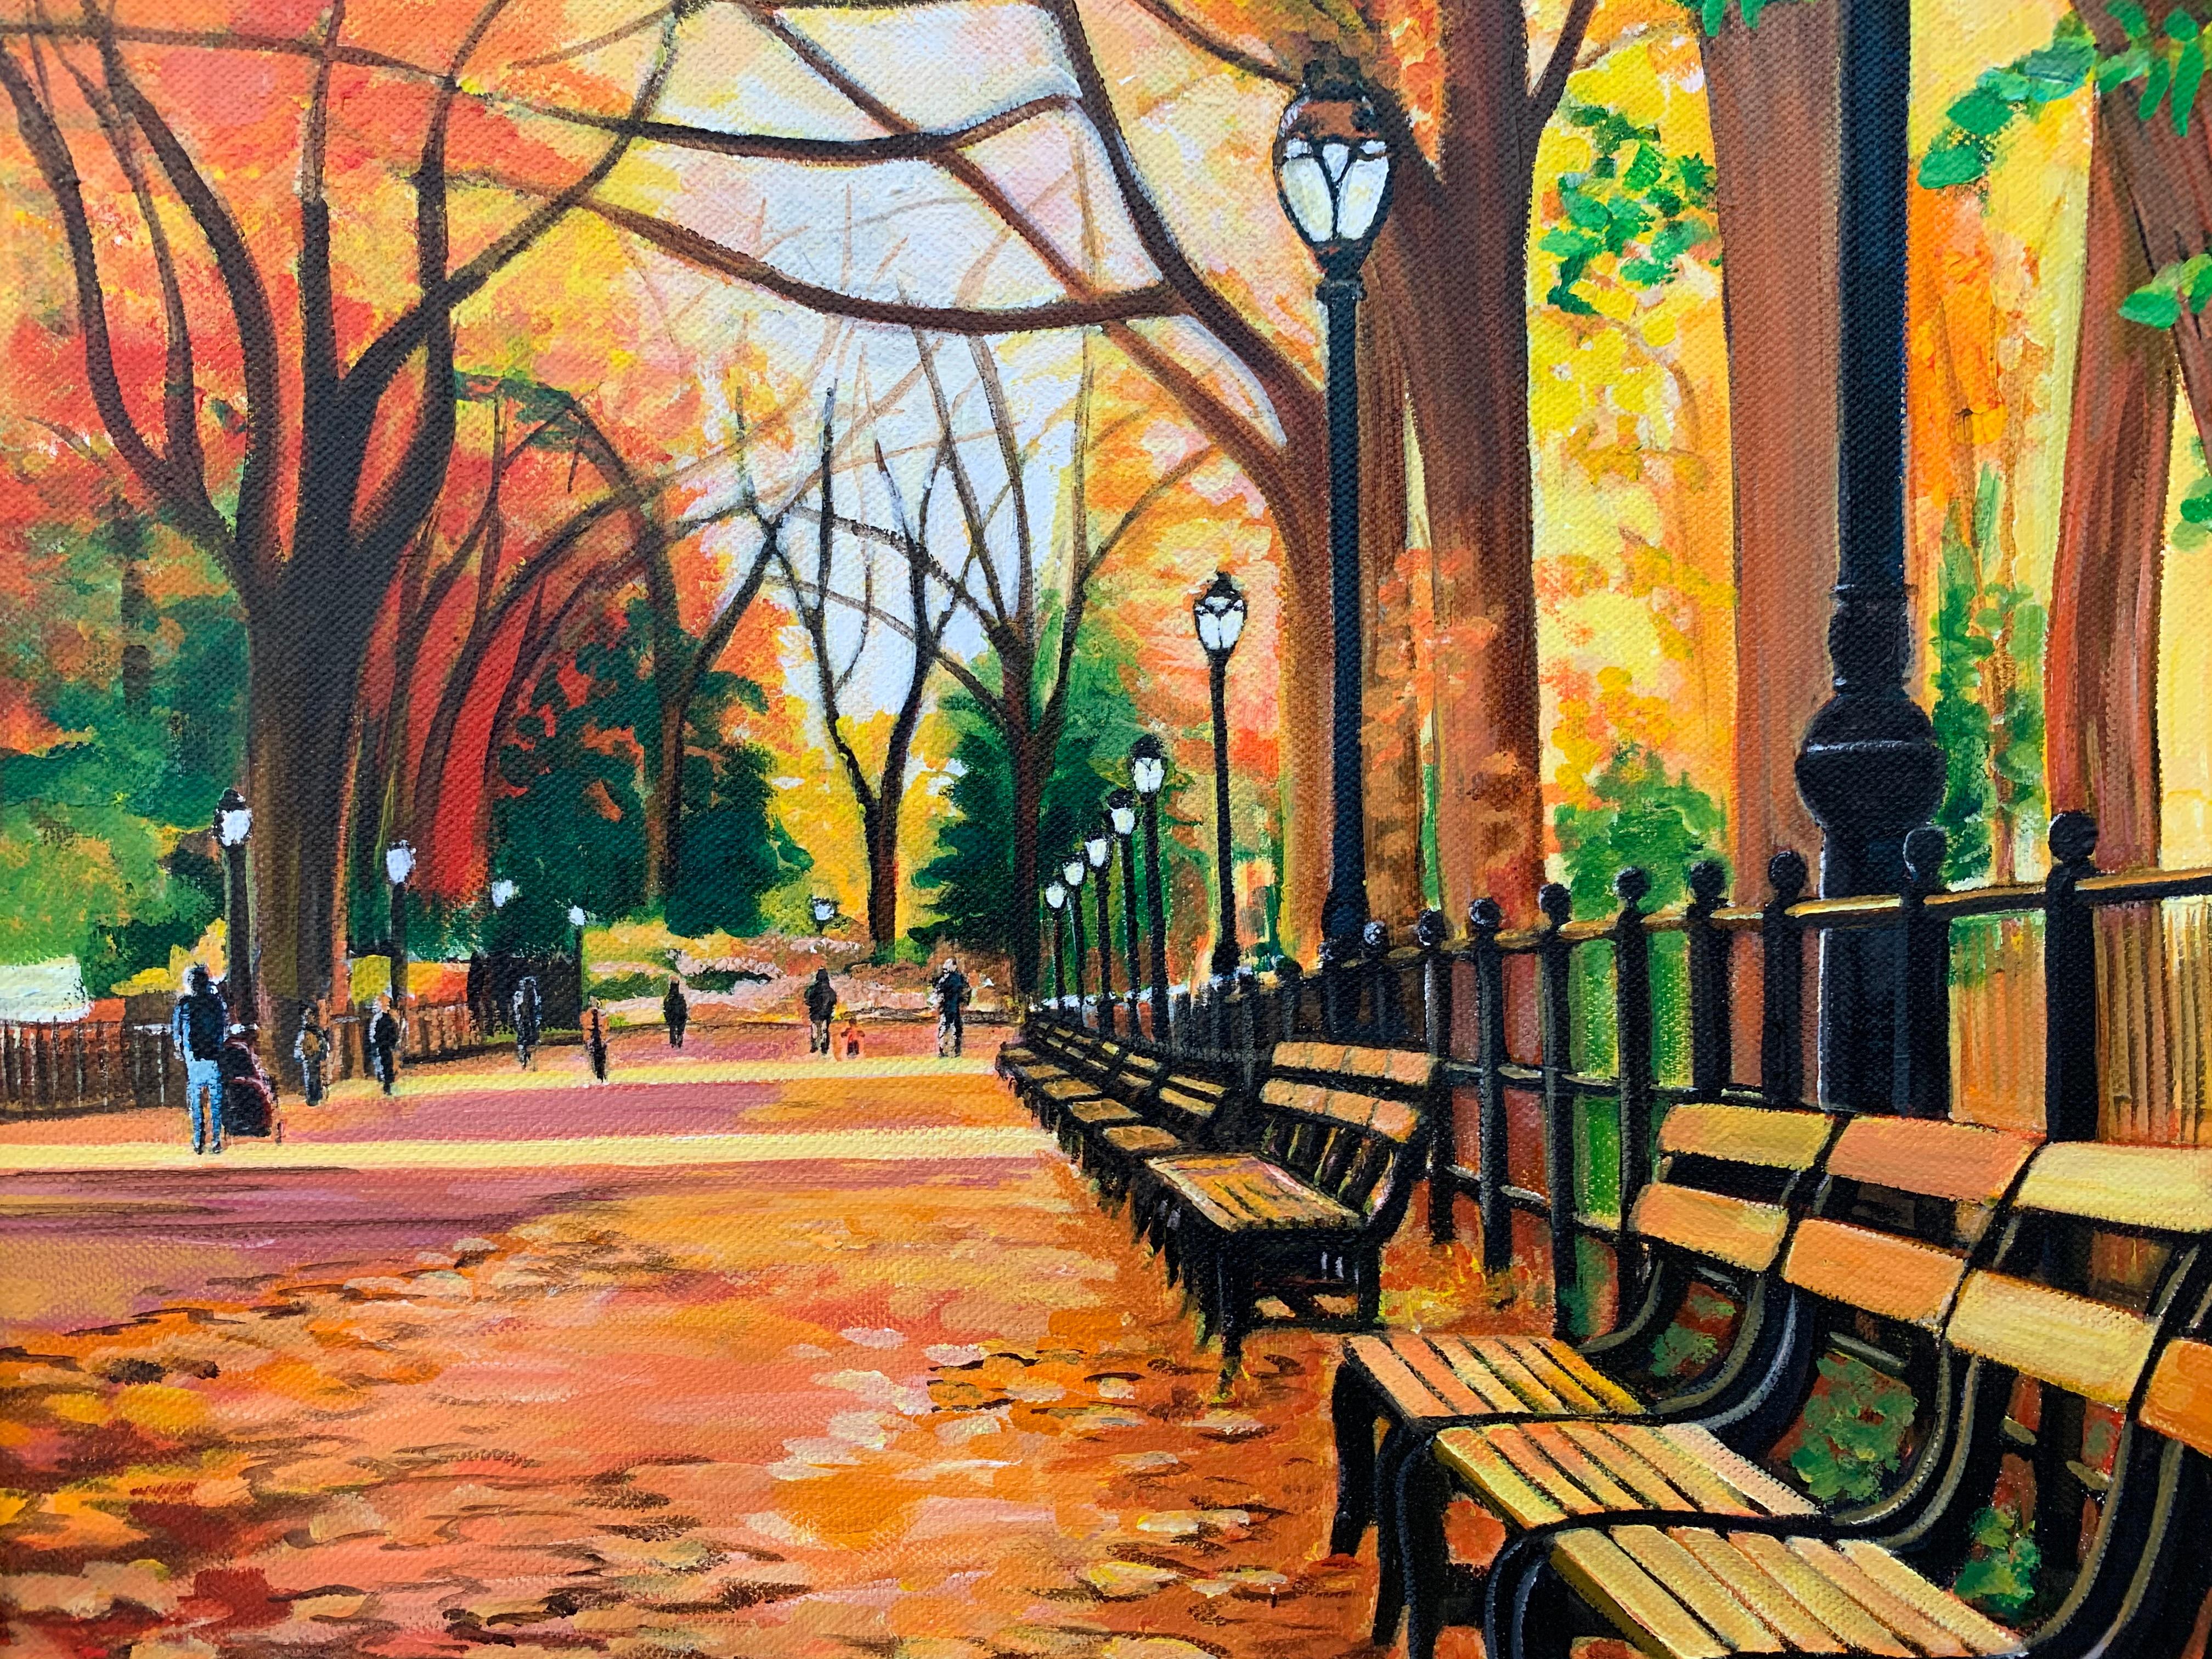 Contemporary Realism Painting of Central Park New York City in Autumn Fall by Collectible British Artist

Art measures 20 x 28 inches
Frame measures 26 x 34 inches

Angela Wakefield has twice been on the front cover of ‘Art of England’ and featured